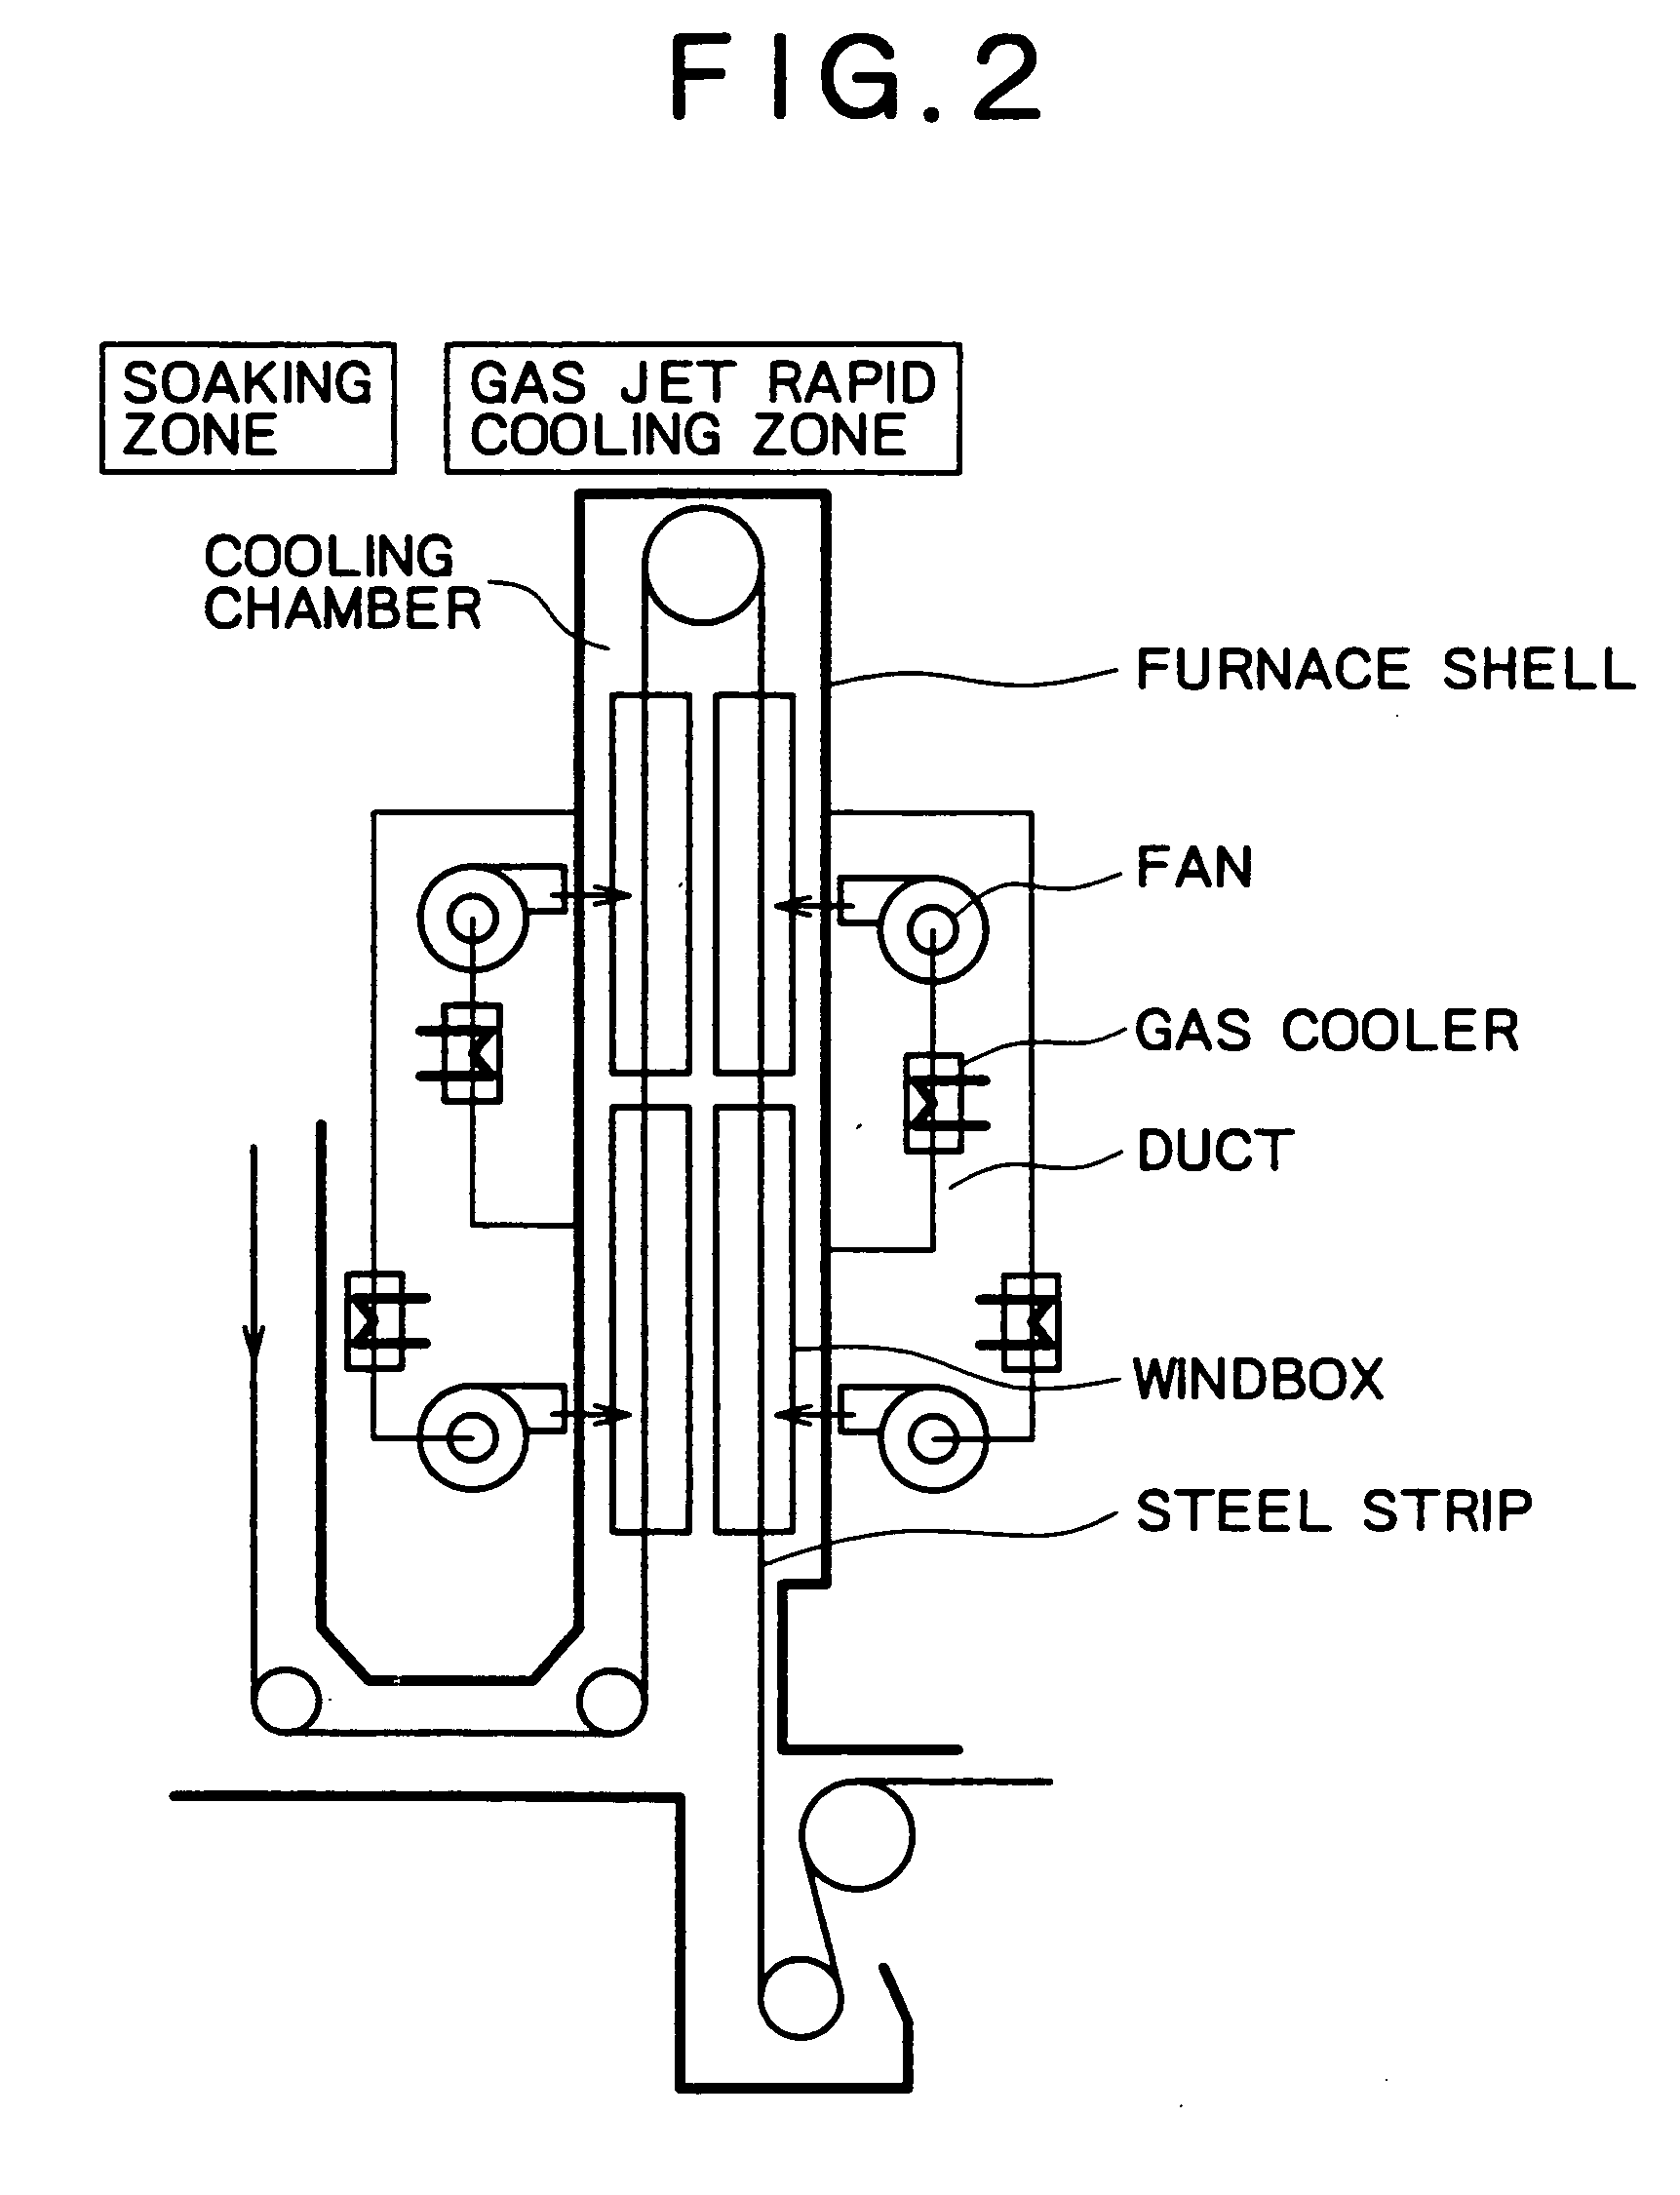 Gas jet cooling device